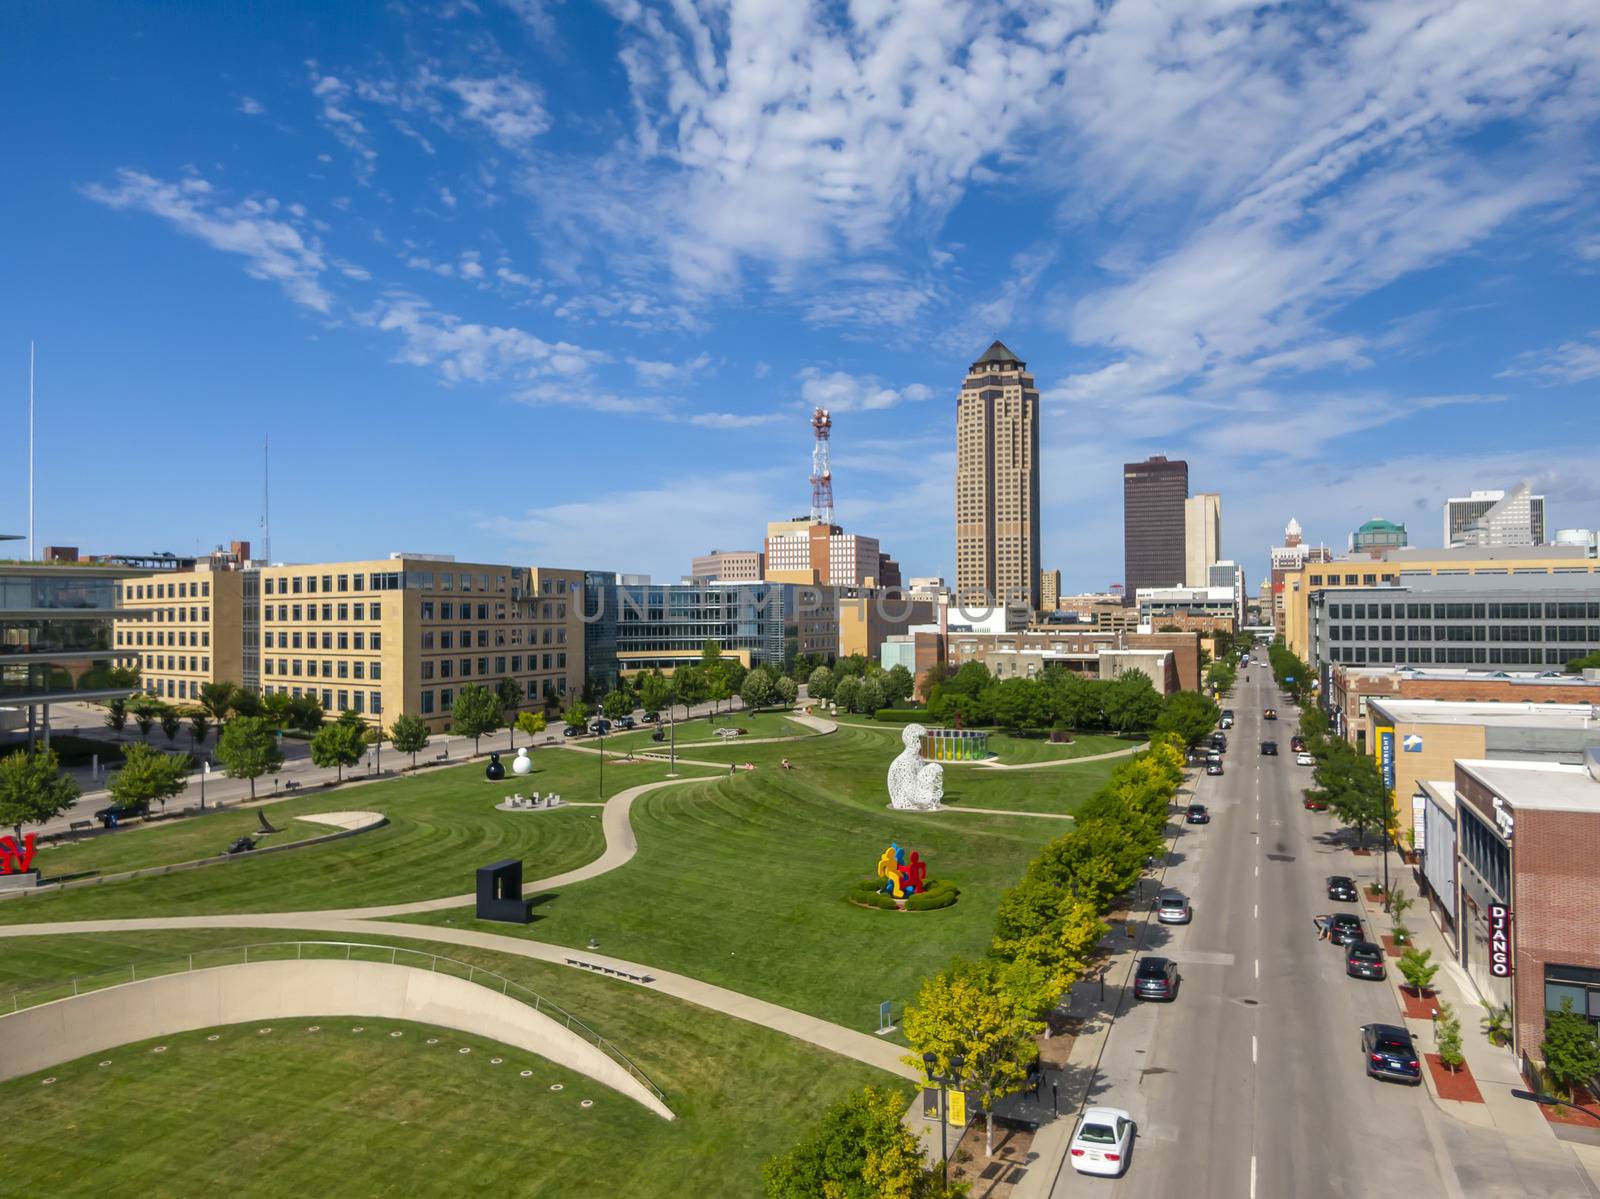 July 19, 2020 - Des Moines, Iowa, USA: Des Moines is the capital of Iowa. It was incorporated on September 22, 1851, as Fort Des Moines, which was shortened to "Des Moines" in 1857default